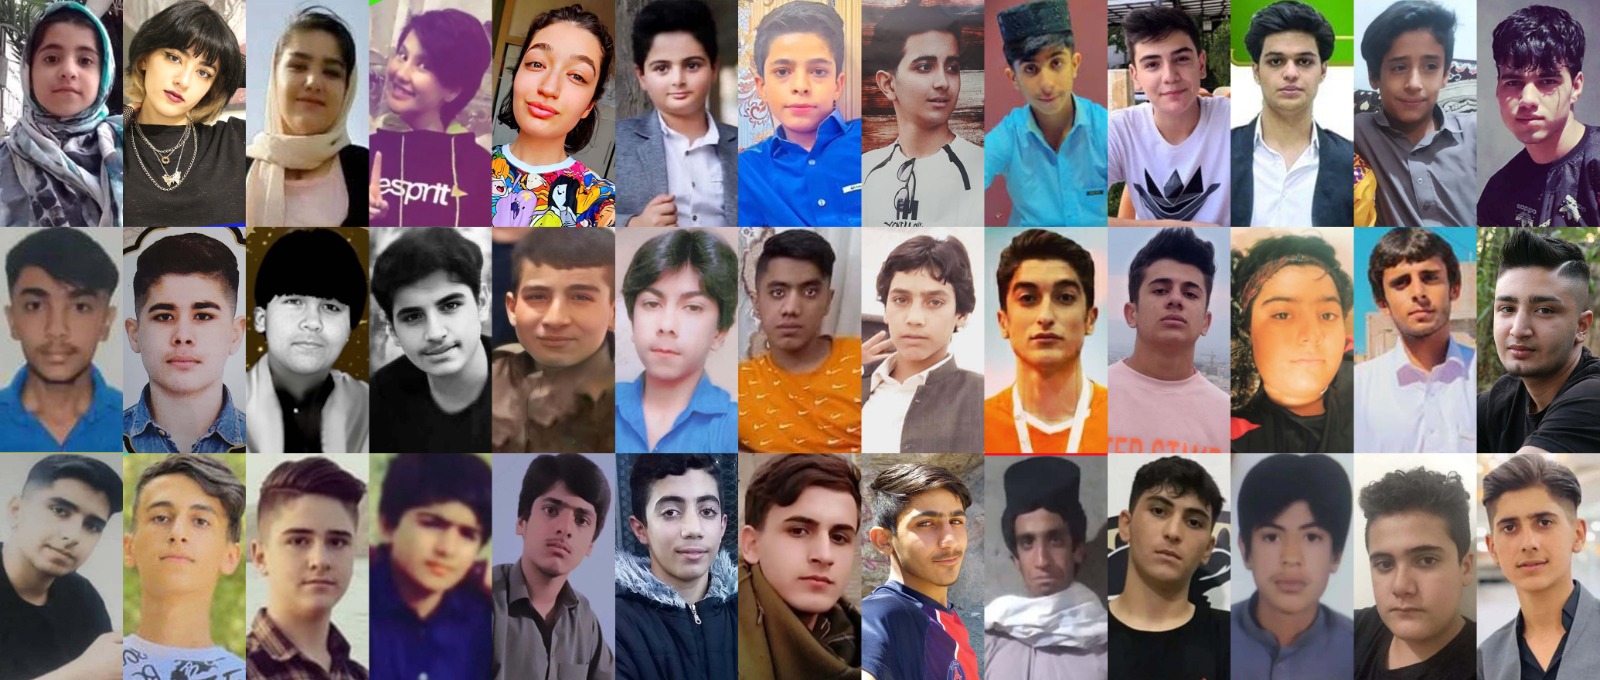 Iran: Authorities covering up their crimes of child killings by coercing families into silence